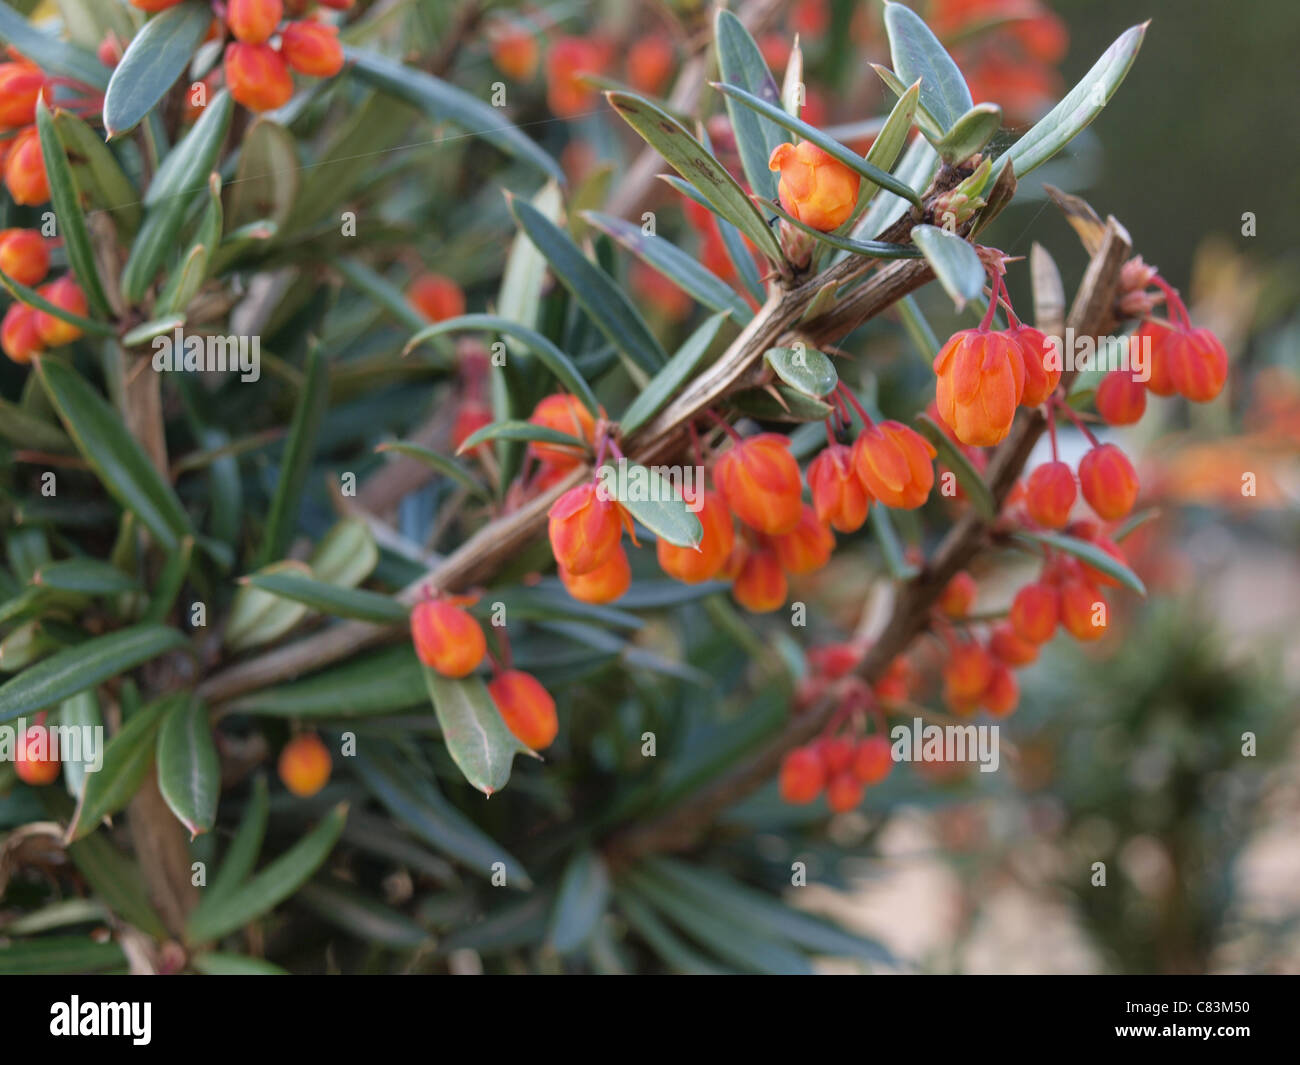 Small orange buds on a plant Stock Photo